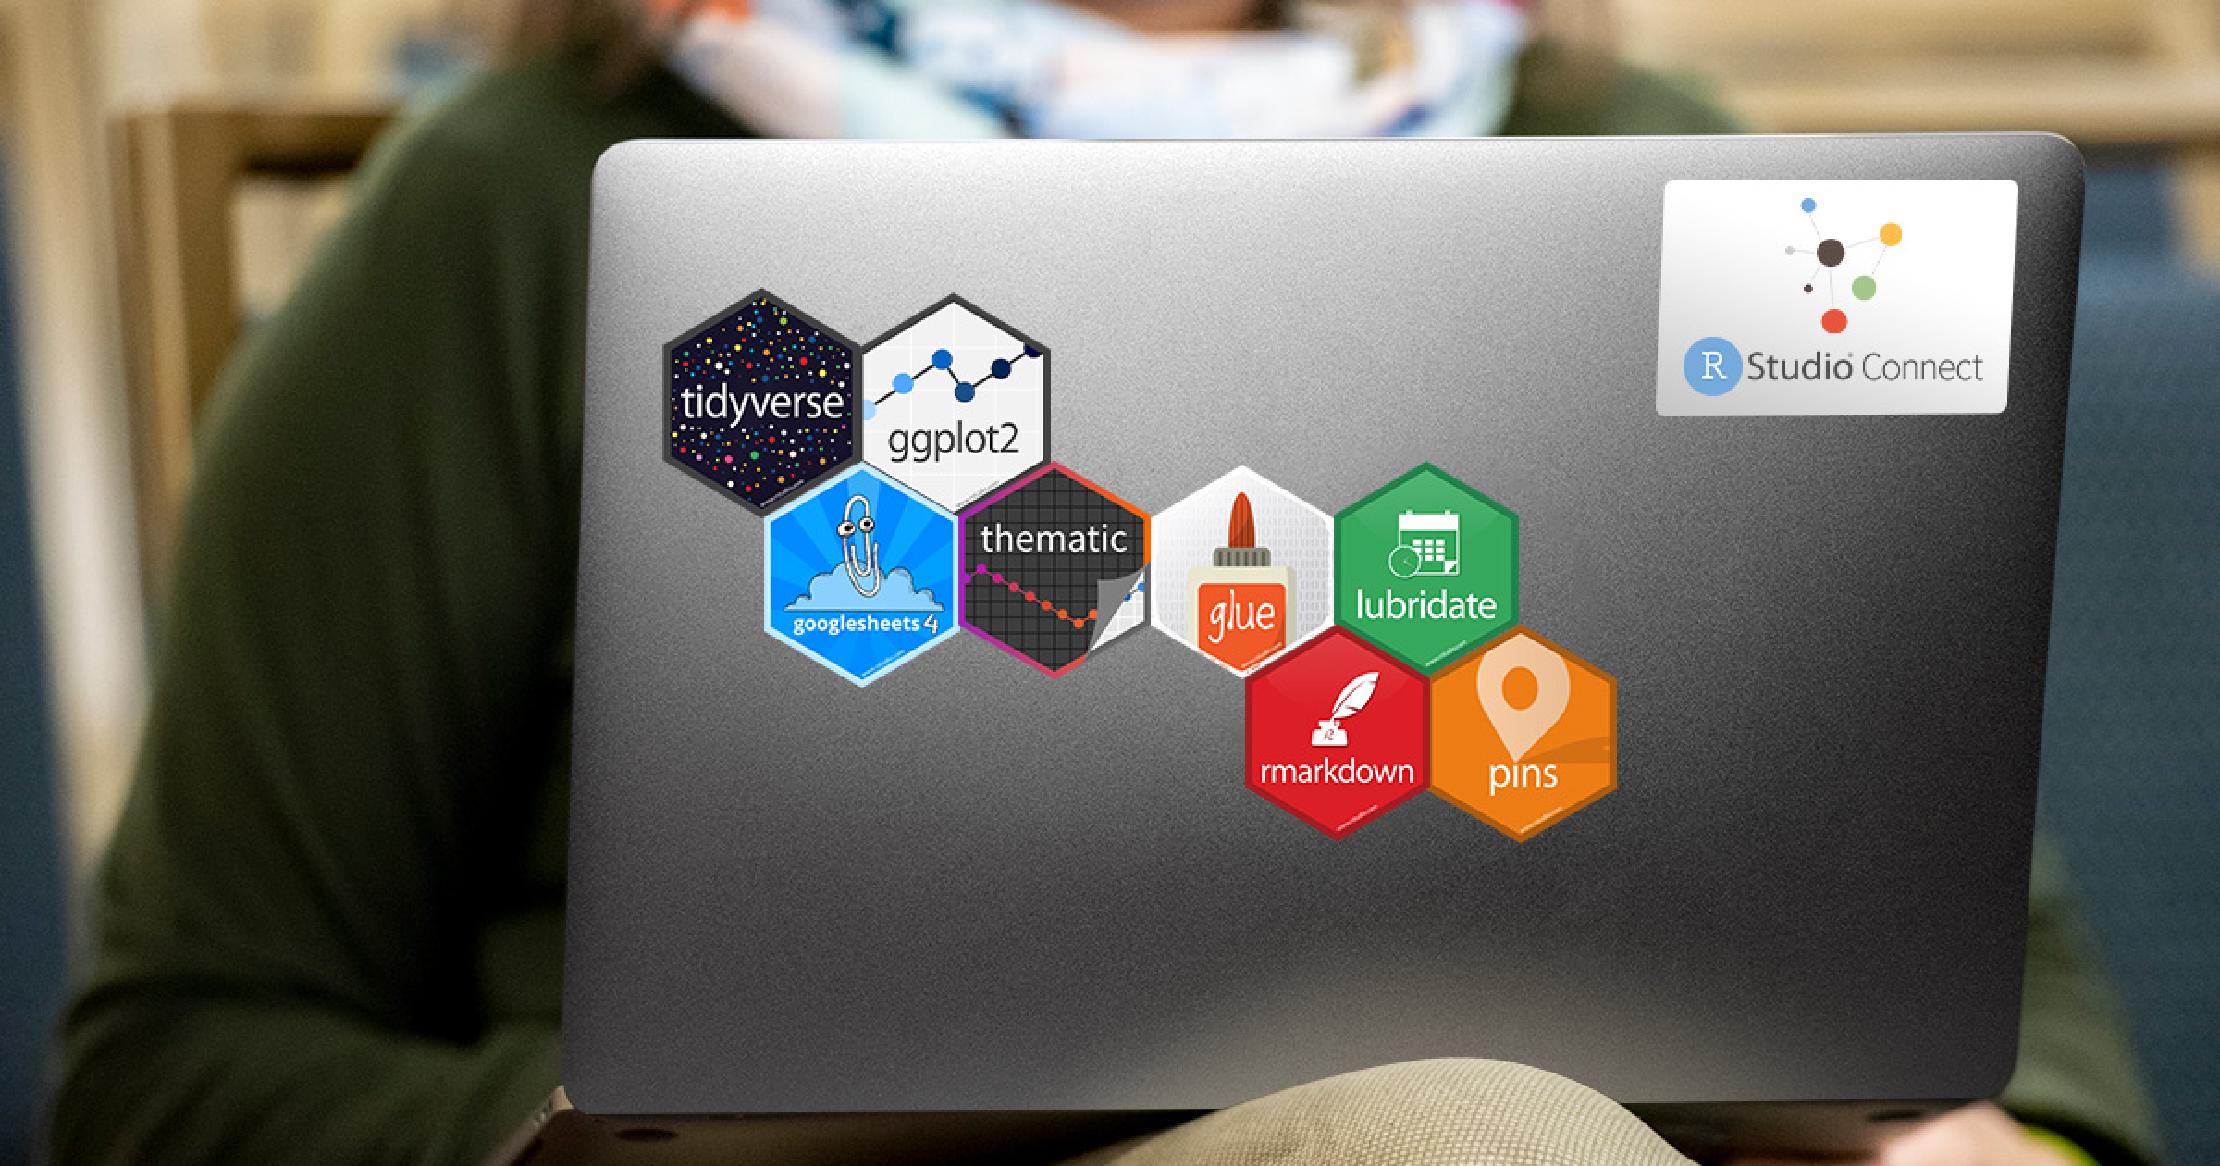 Thumbnail Grey laptop with a variety of R package hex stickers, the tidyverse, ggplot2, googlesheets4, thematic, glue, lubridate, rmarkdown, and pins and a sticker for RStudio Connect